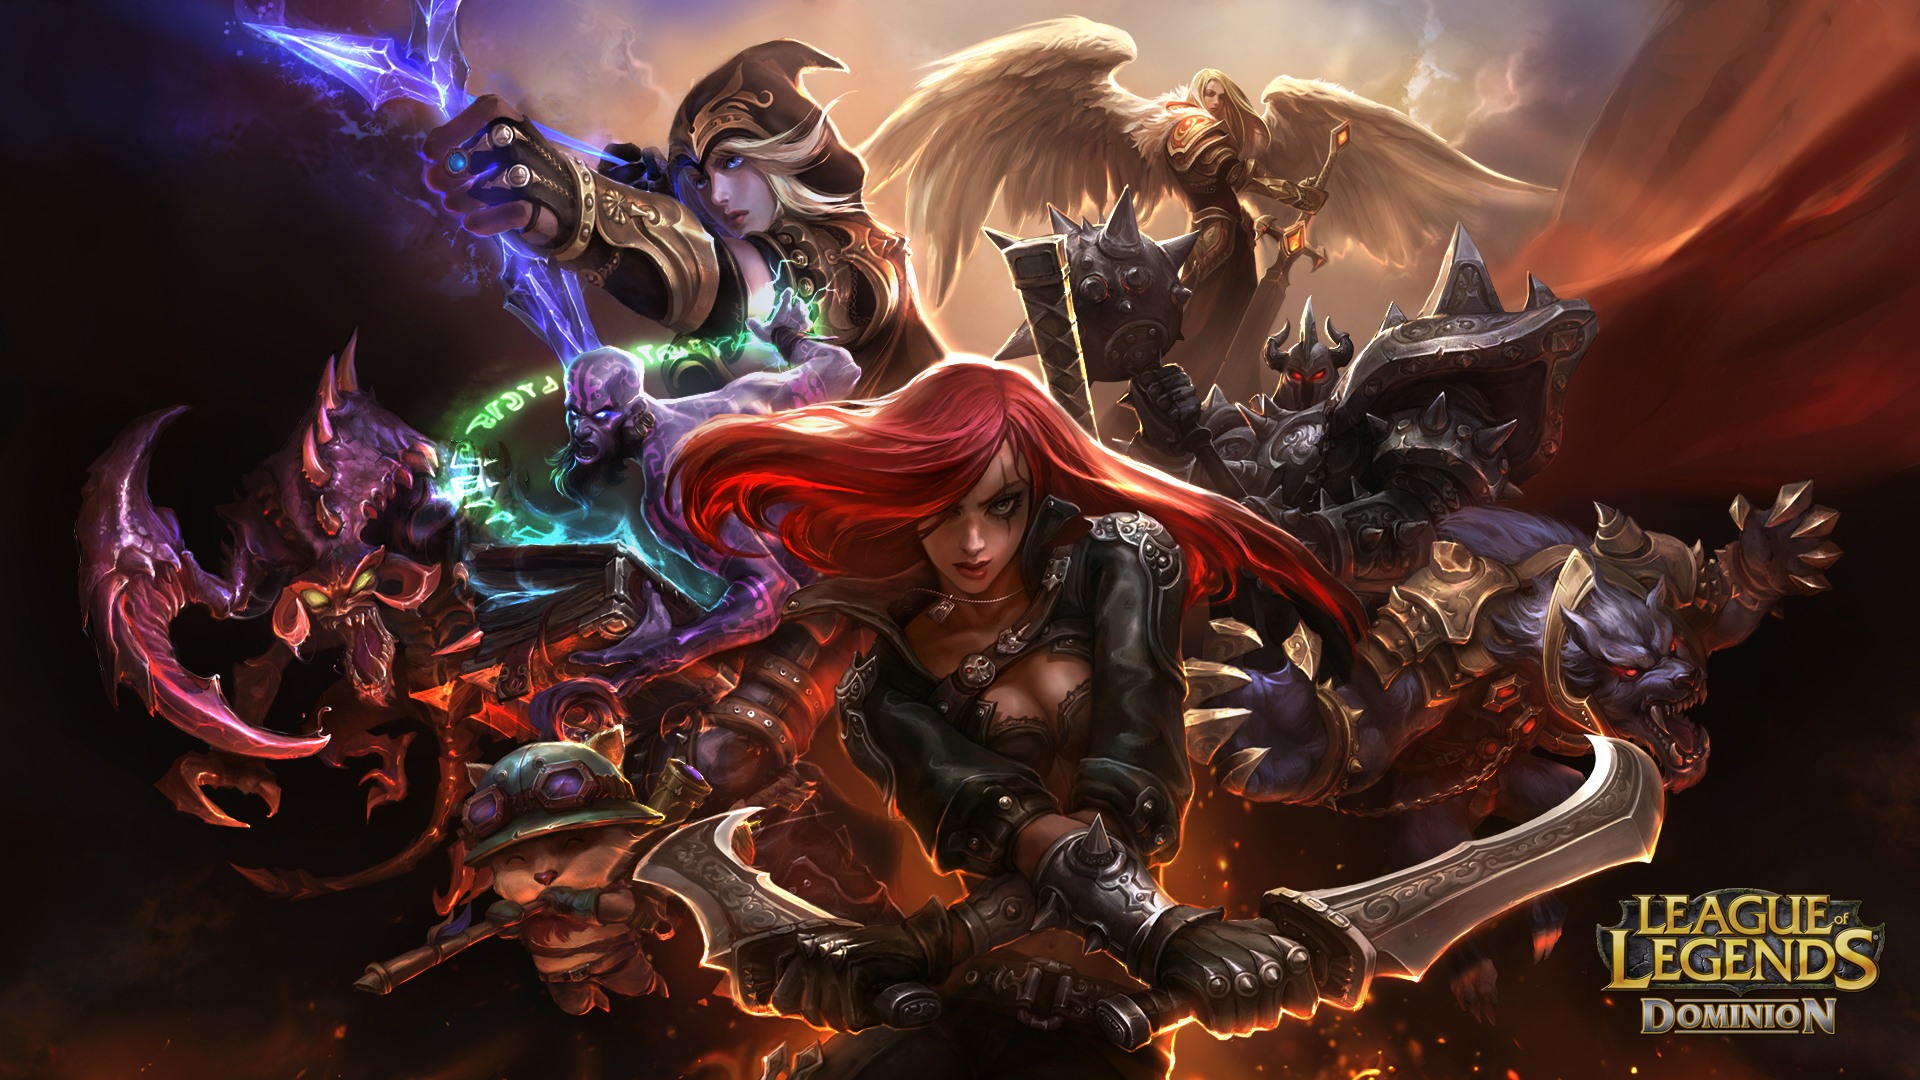 League of Legends game HD wallpapers #9 - 1920x1080